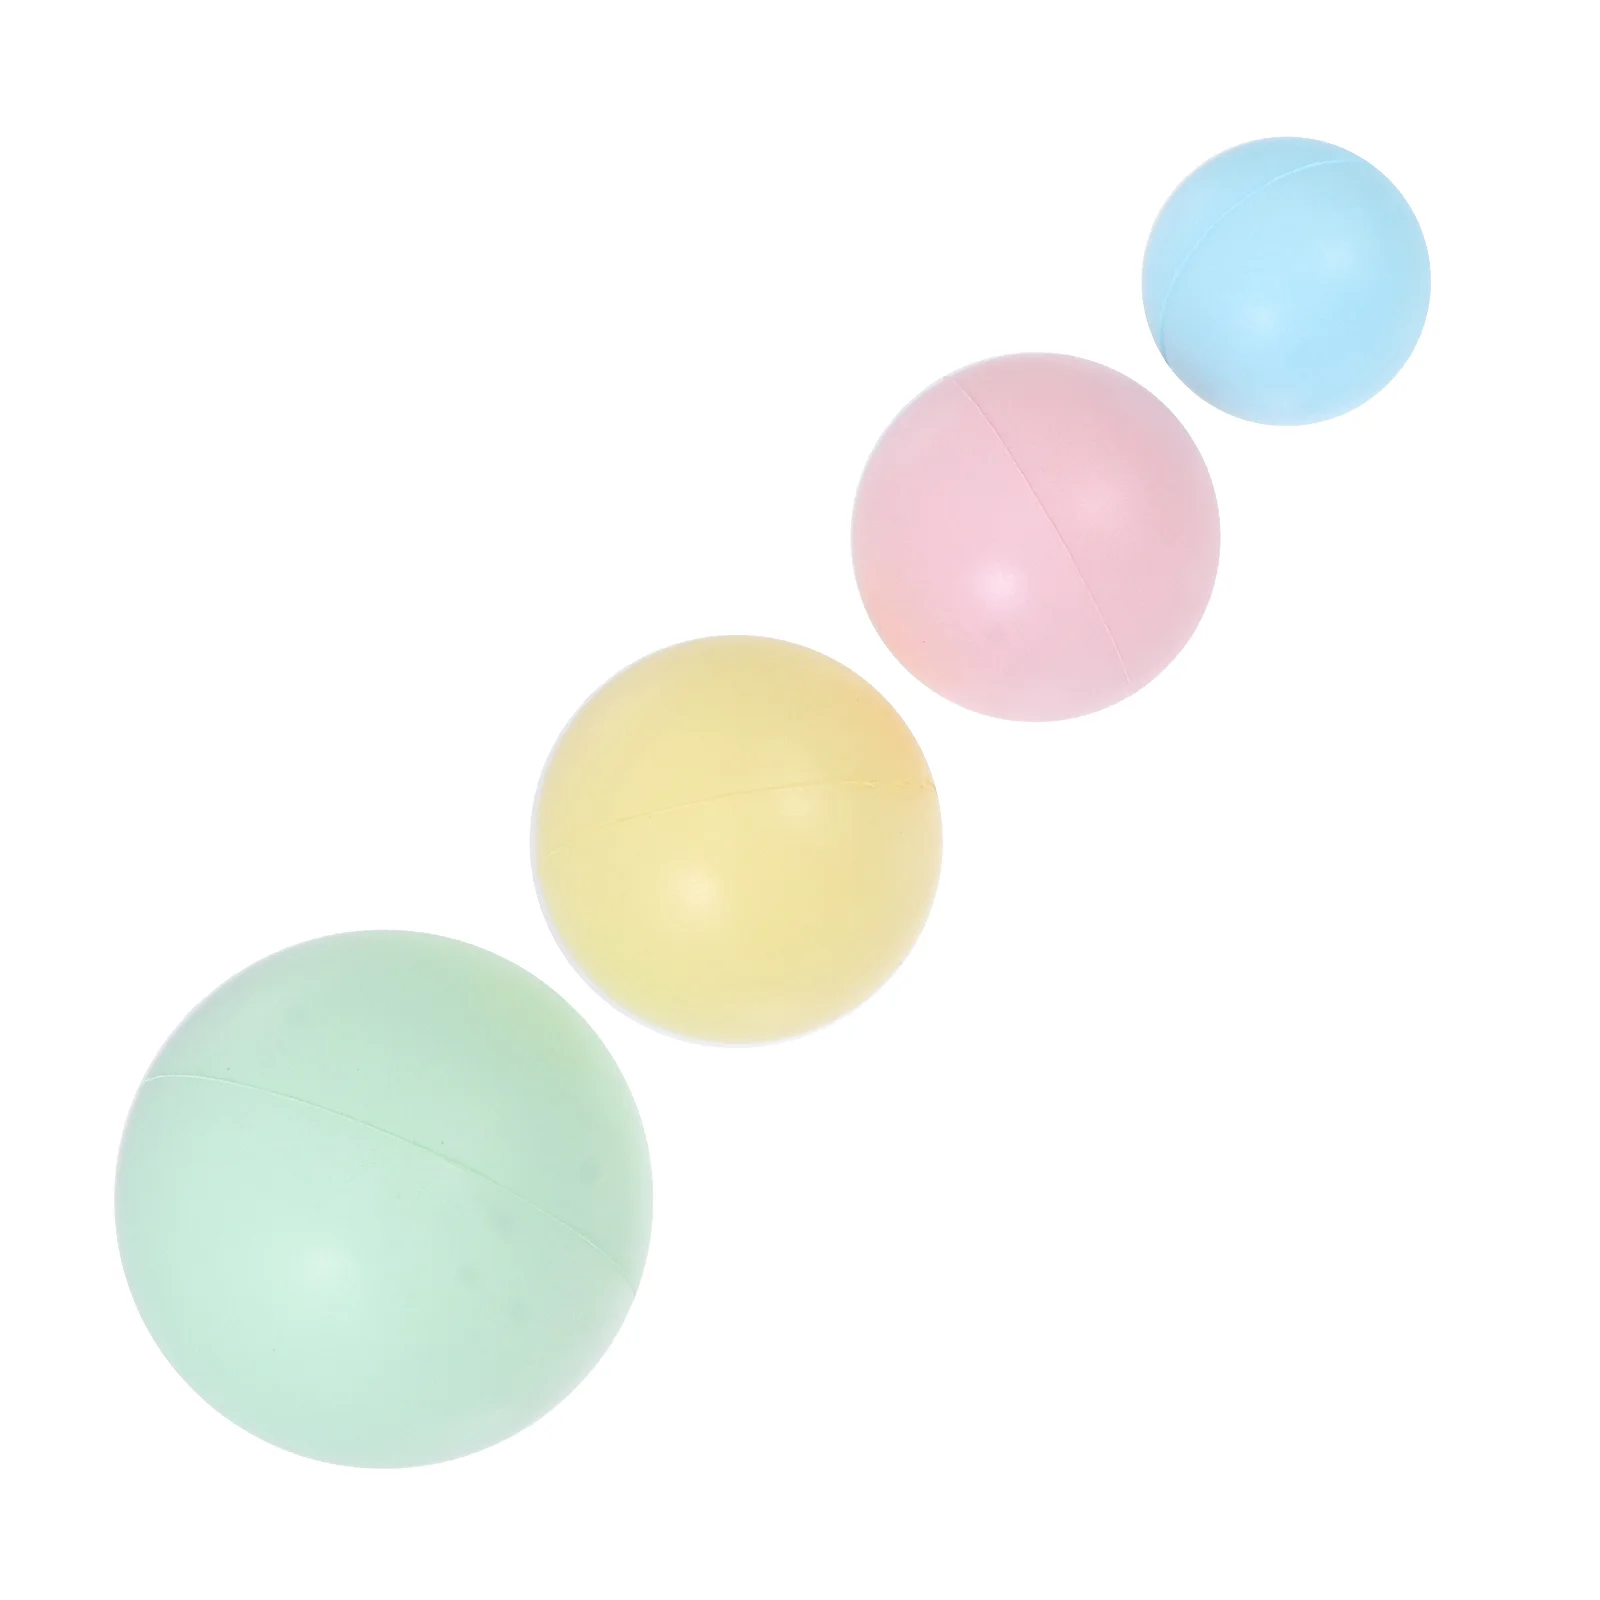 

4 Pcs Piano Gesture Ball Kids Hand Trainer Stress Practice High Resilience Sponge Material Supplies Correctors Child